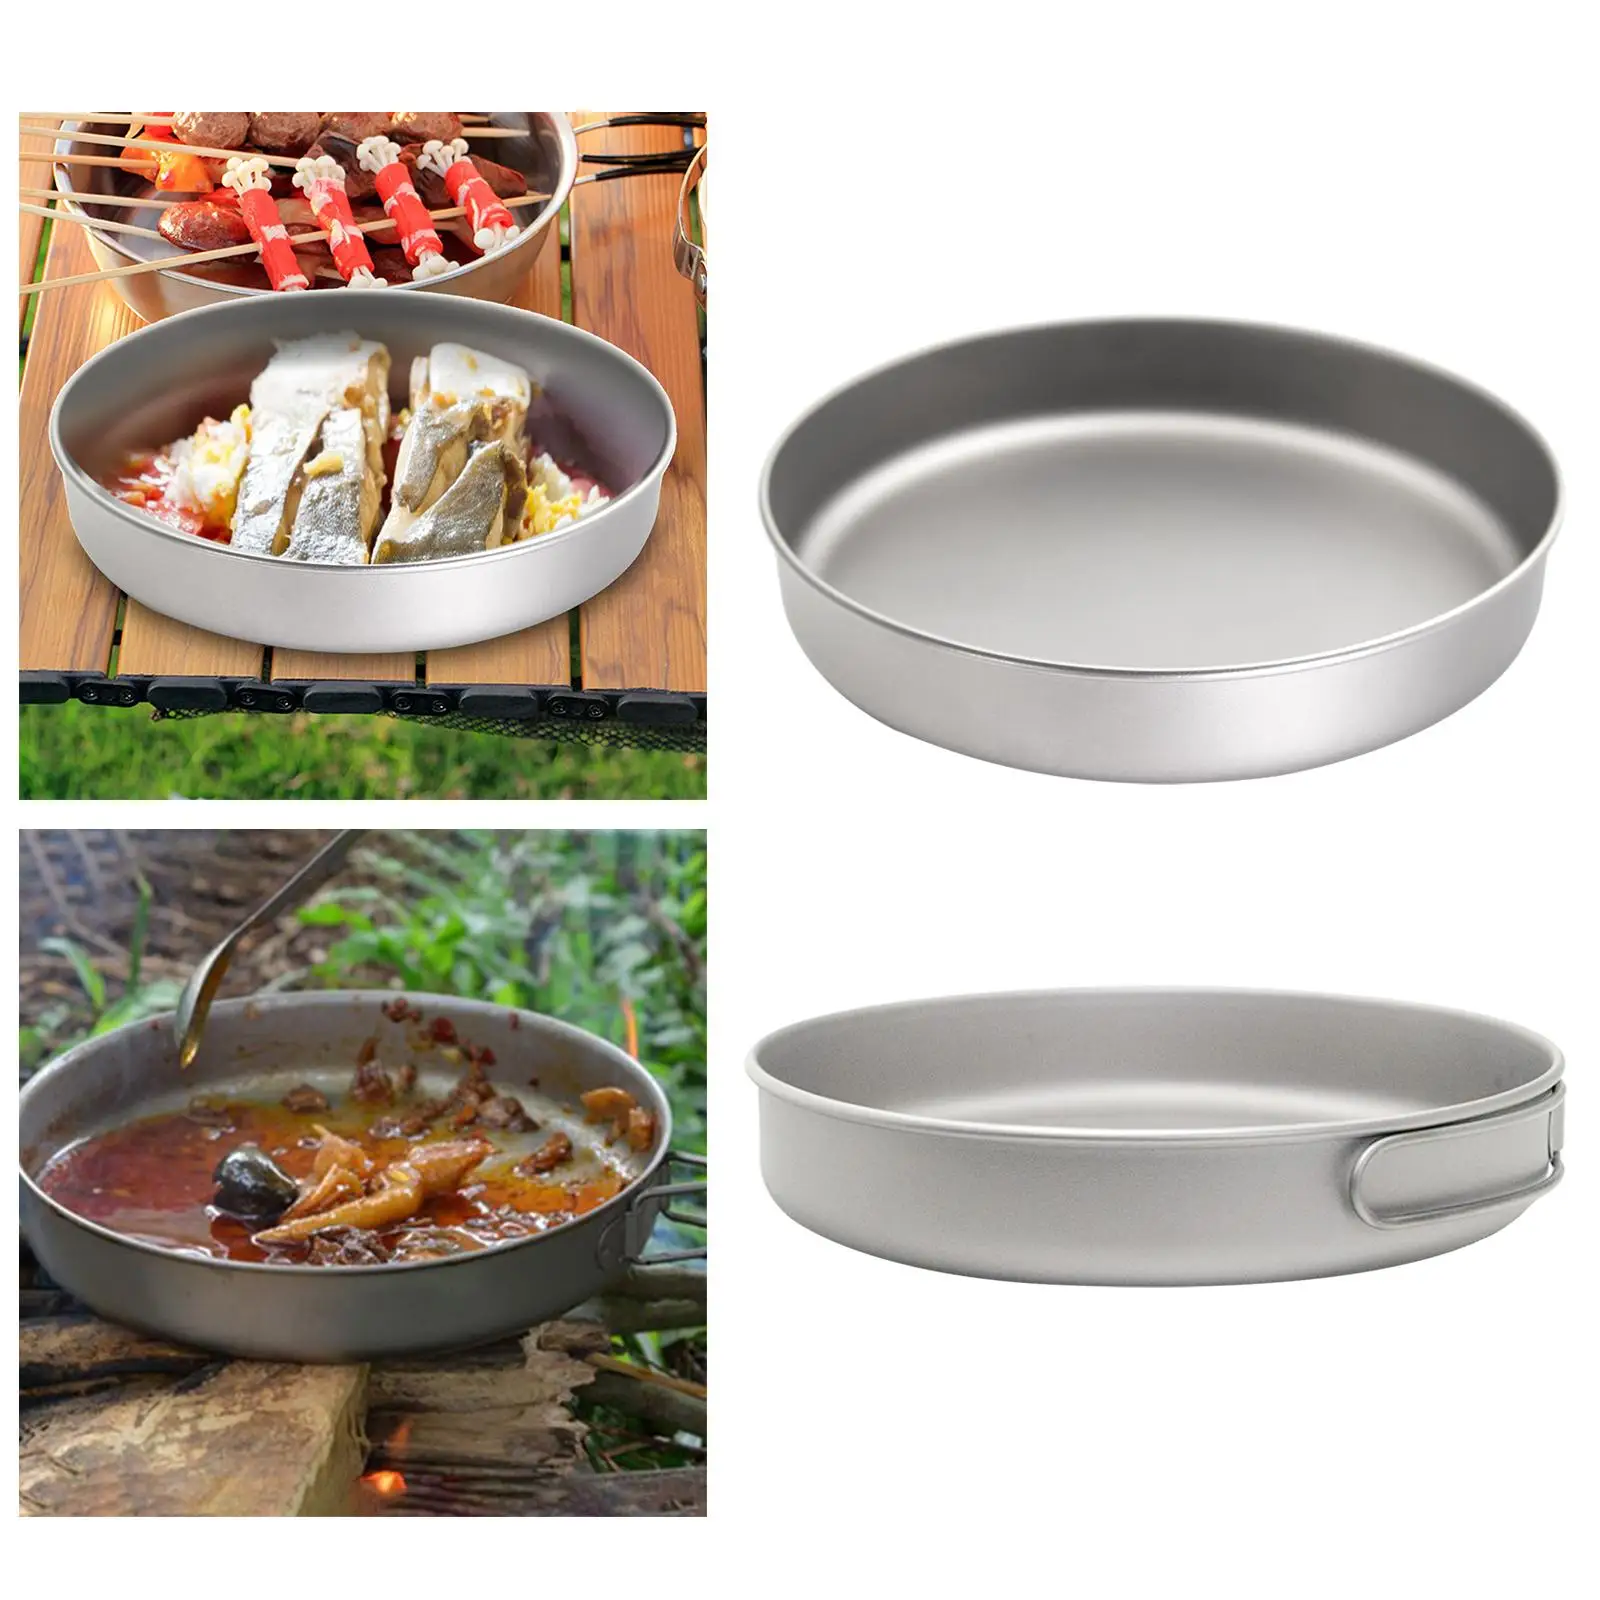 Titanium Pan Camping Cookware Ultralight Plate Dish Tableware Bowl Fry Pan for Home Outdoor Cooking Backpacking Hiking Camping